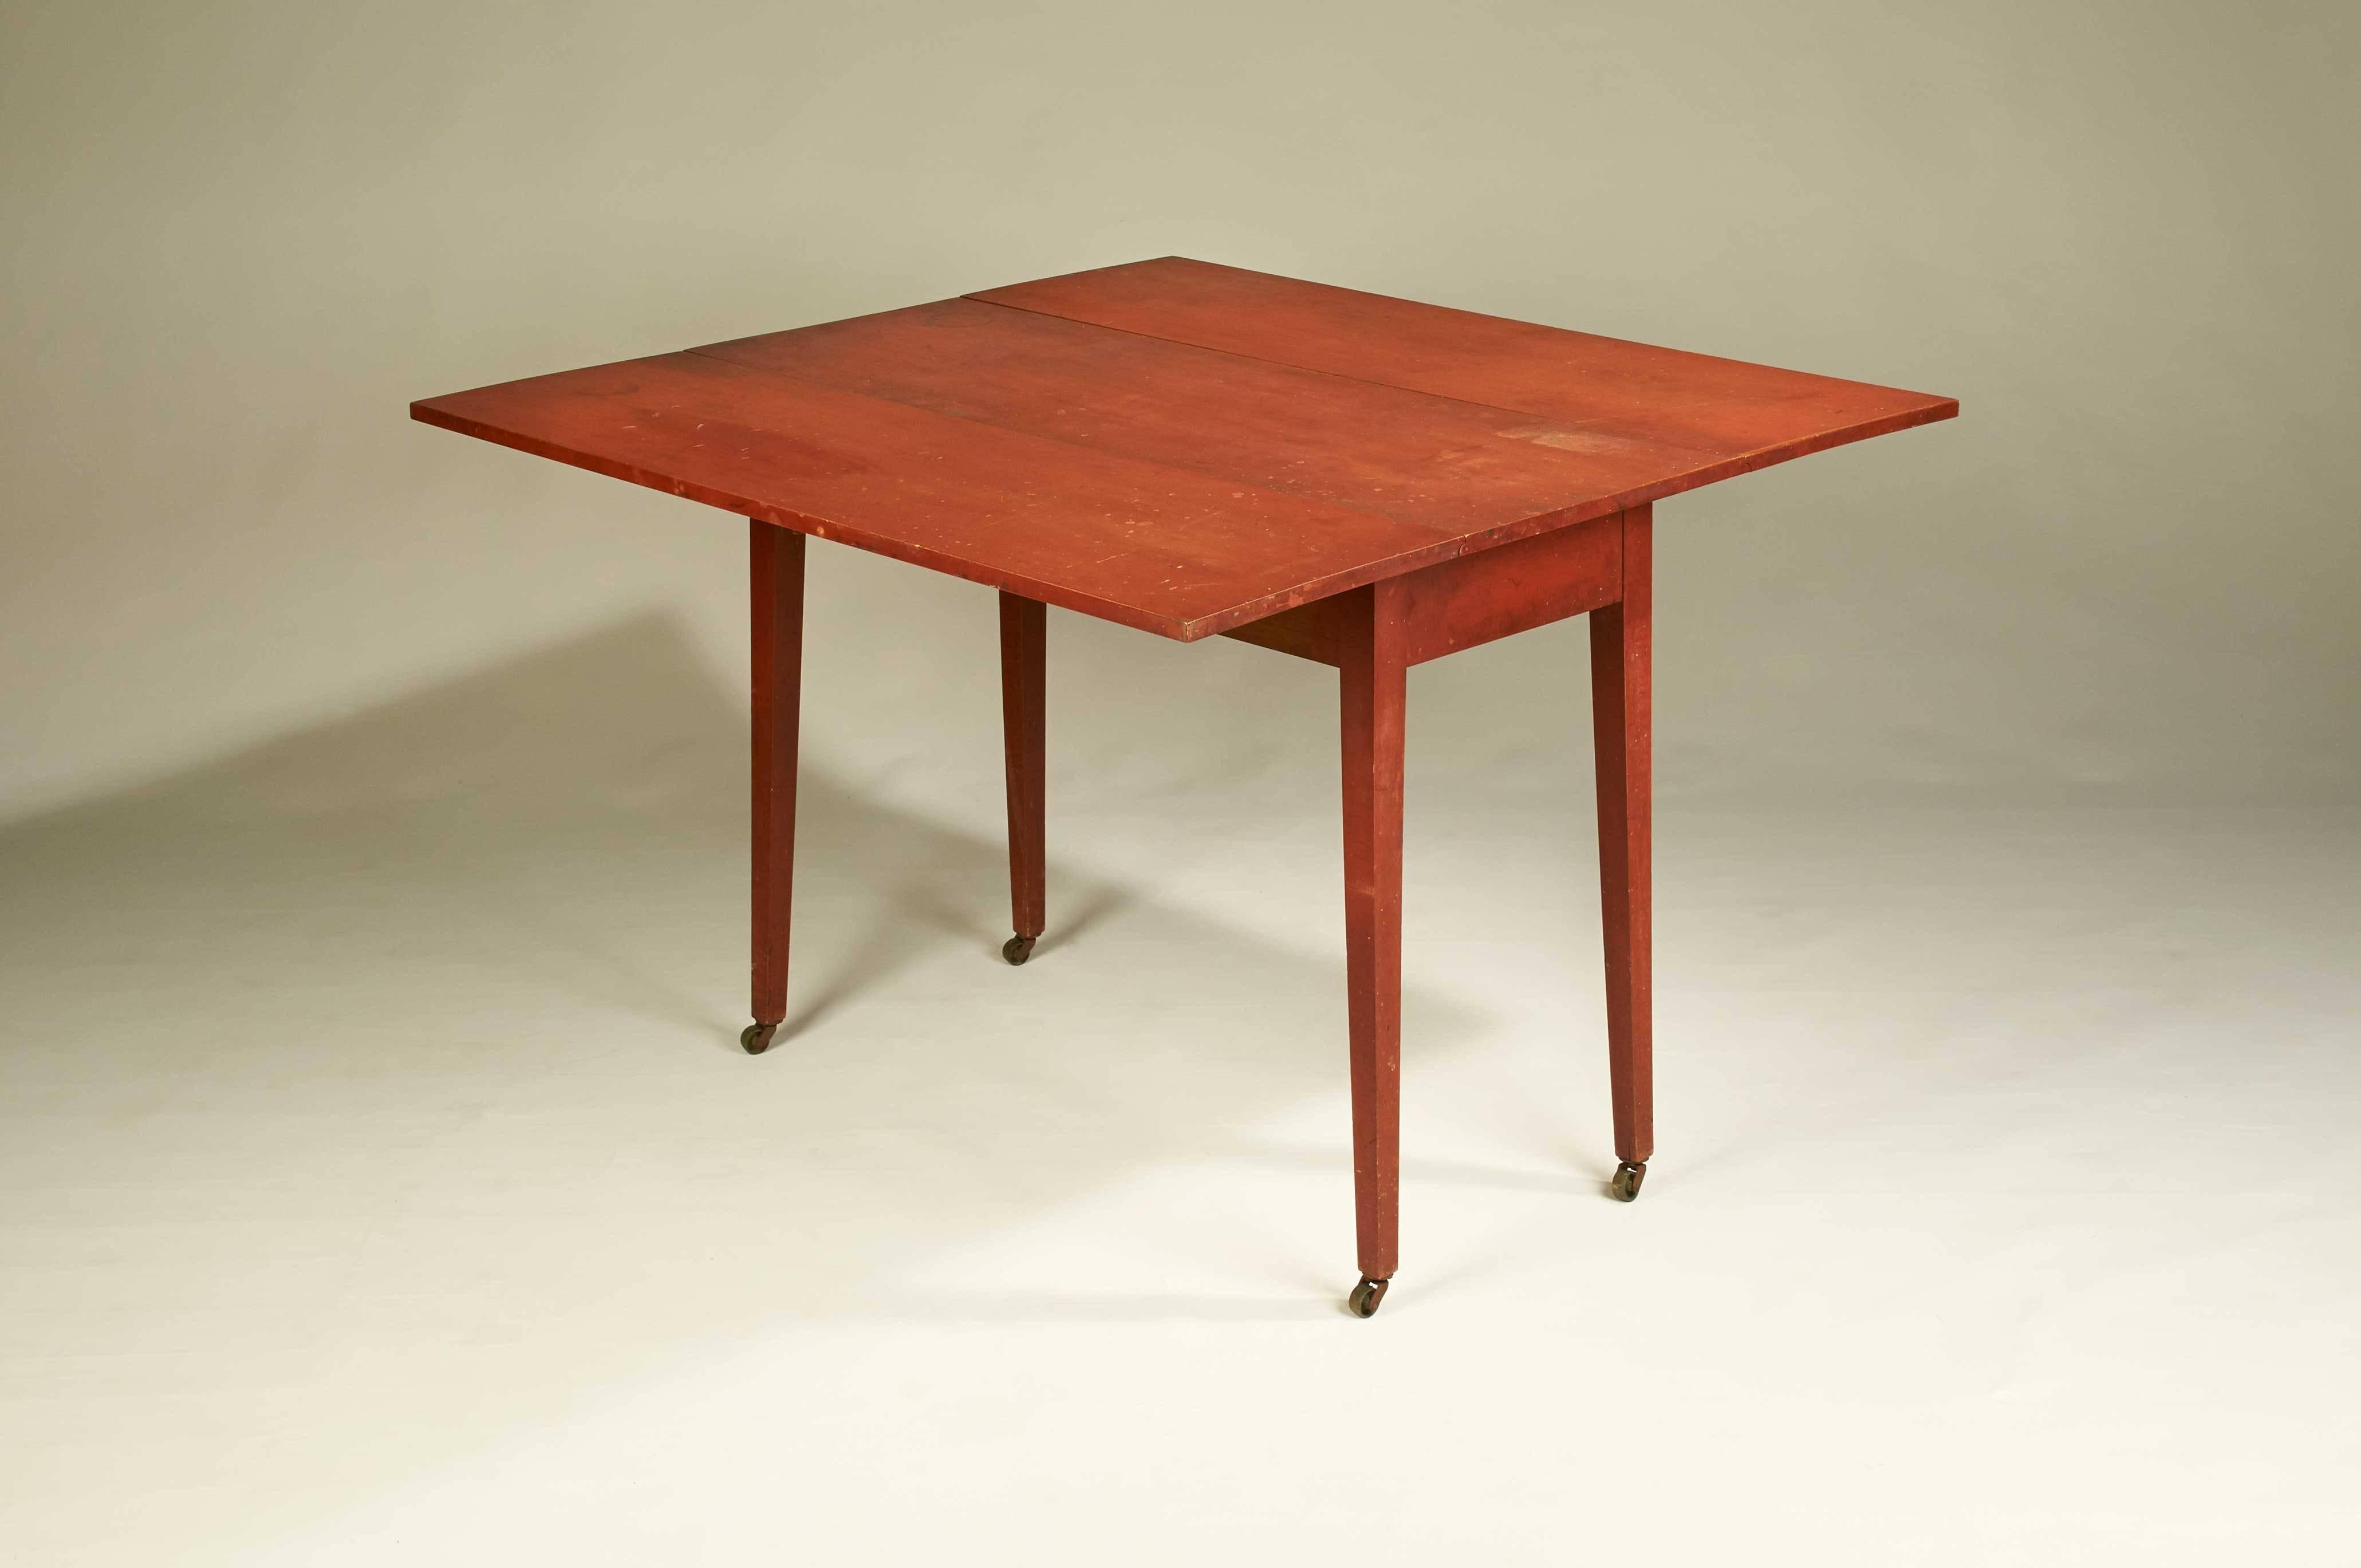 A New England country drop-leaf table with original red-painted surface over a maple frame. Legs are tiger maple.